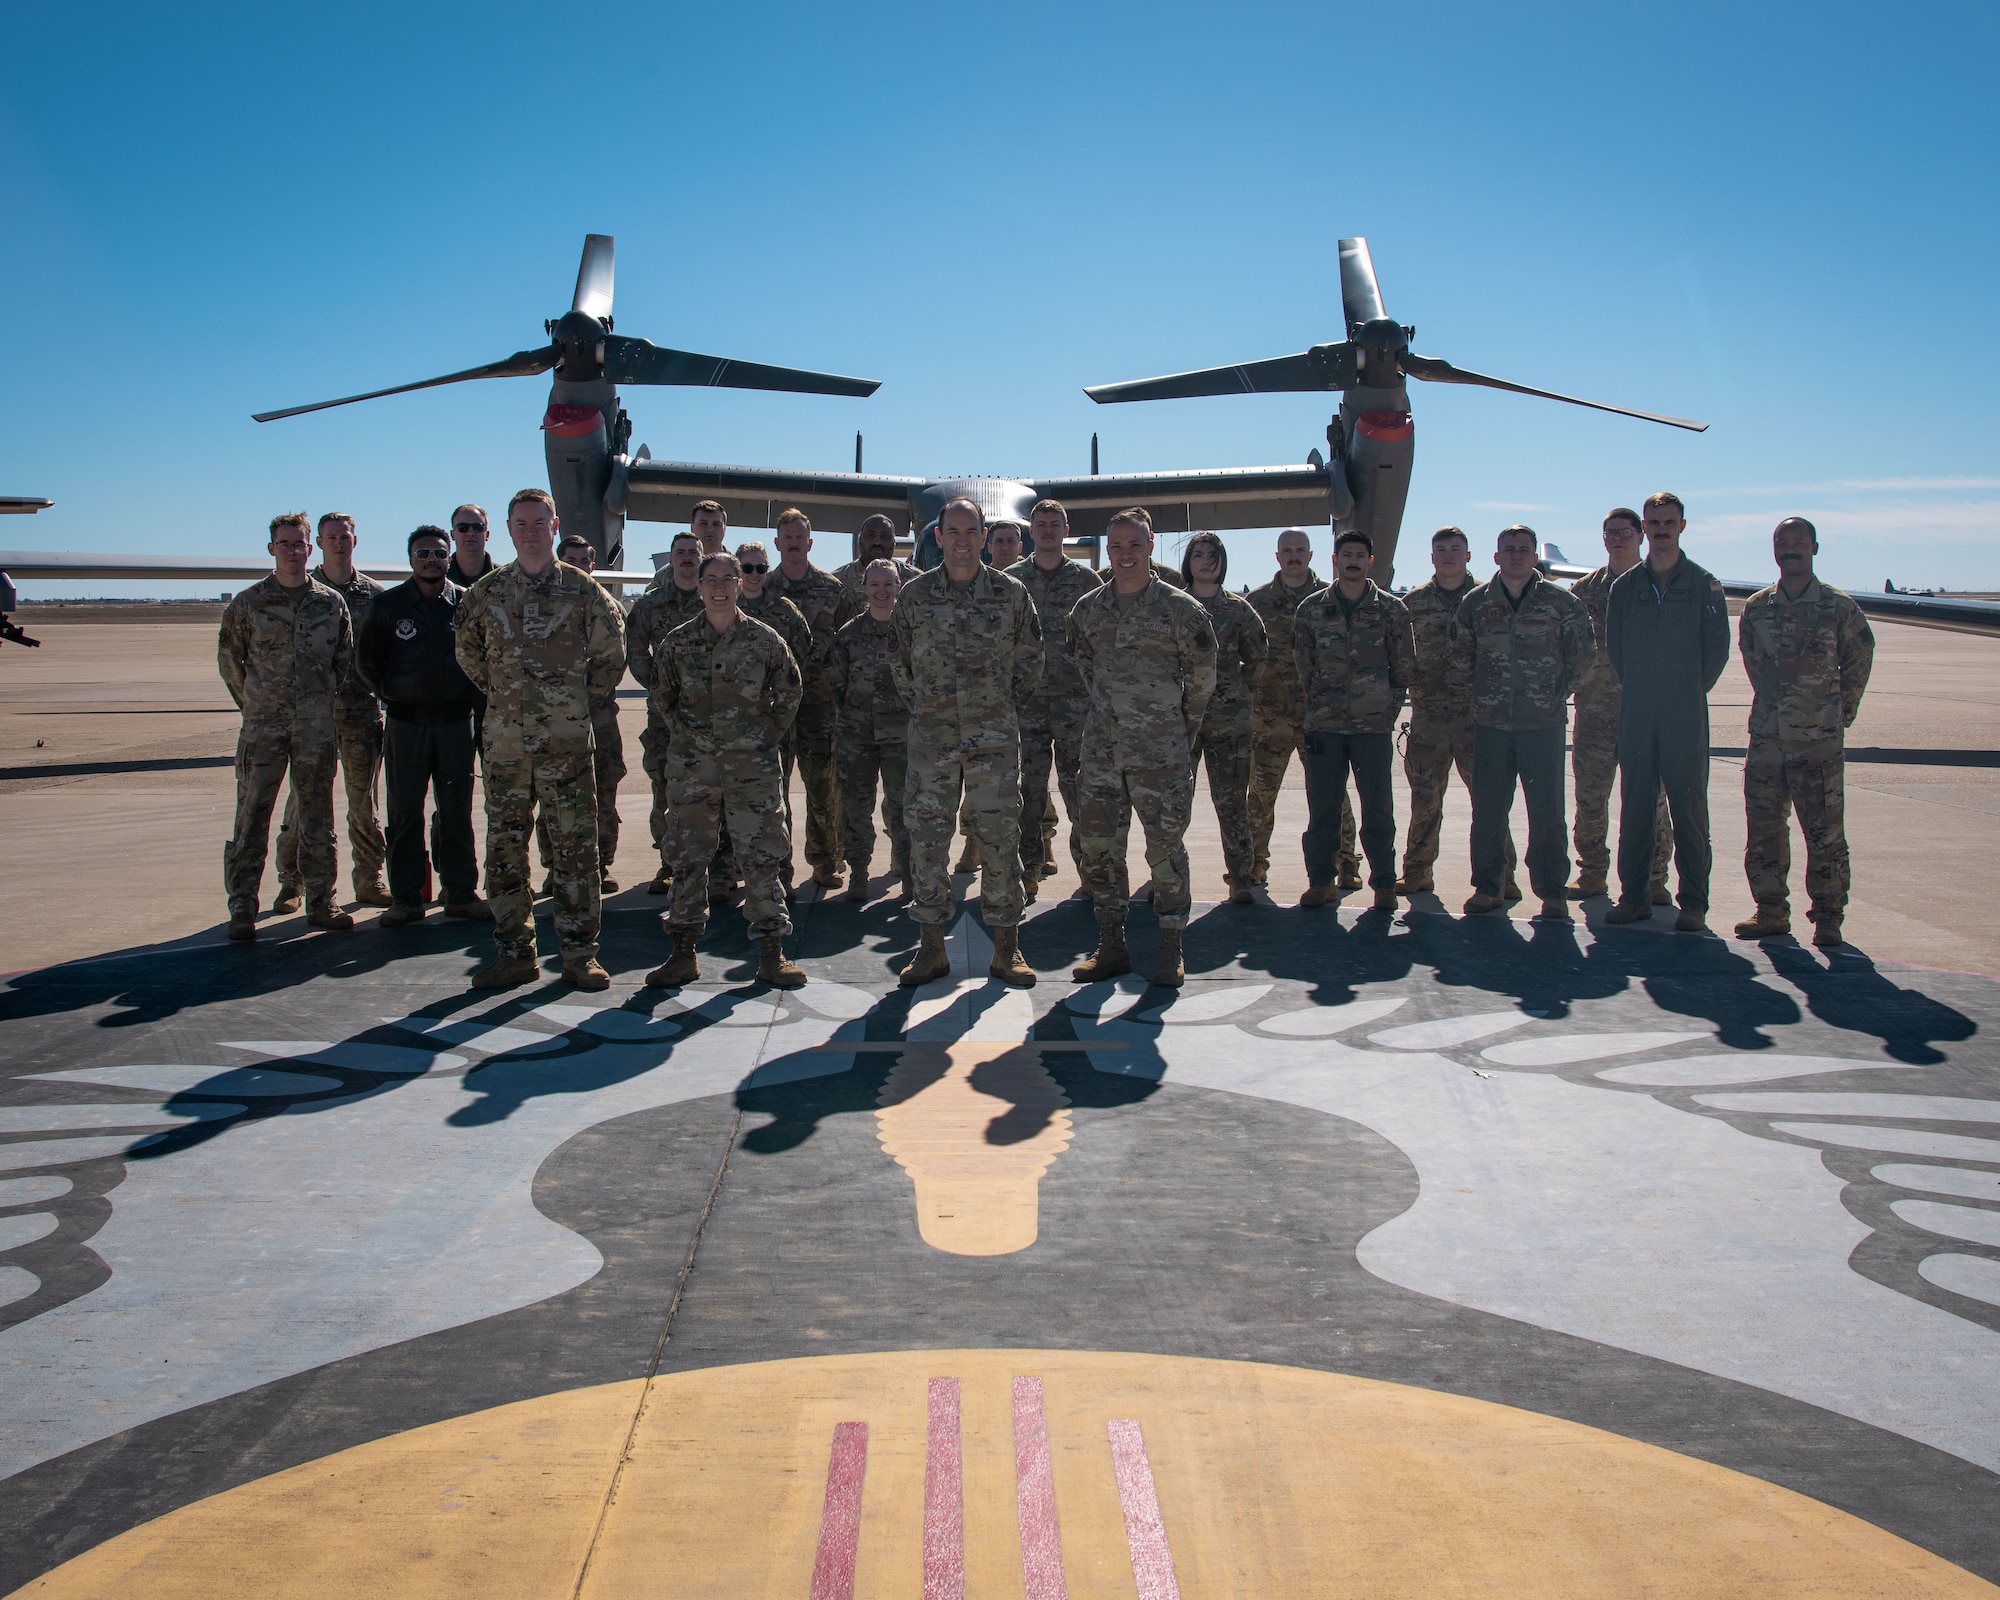 A group of people in military uniform pose for a photo in front of a military tiltrotor aircraft on a tarmac.